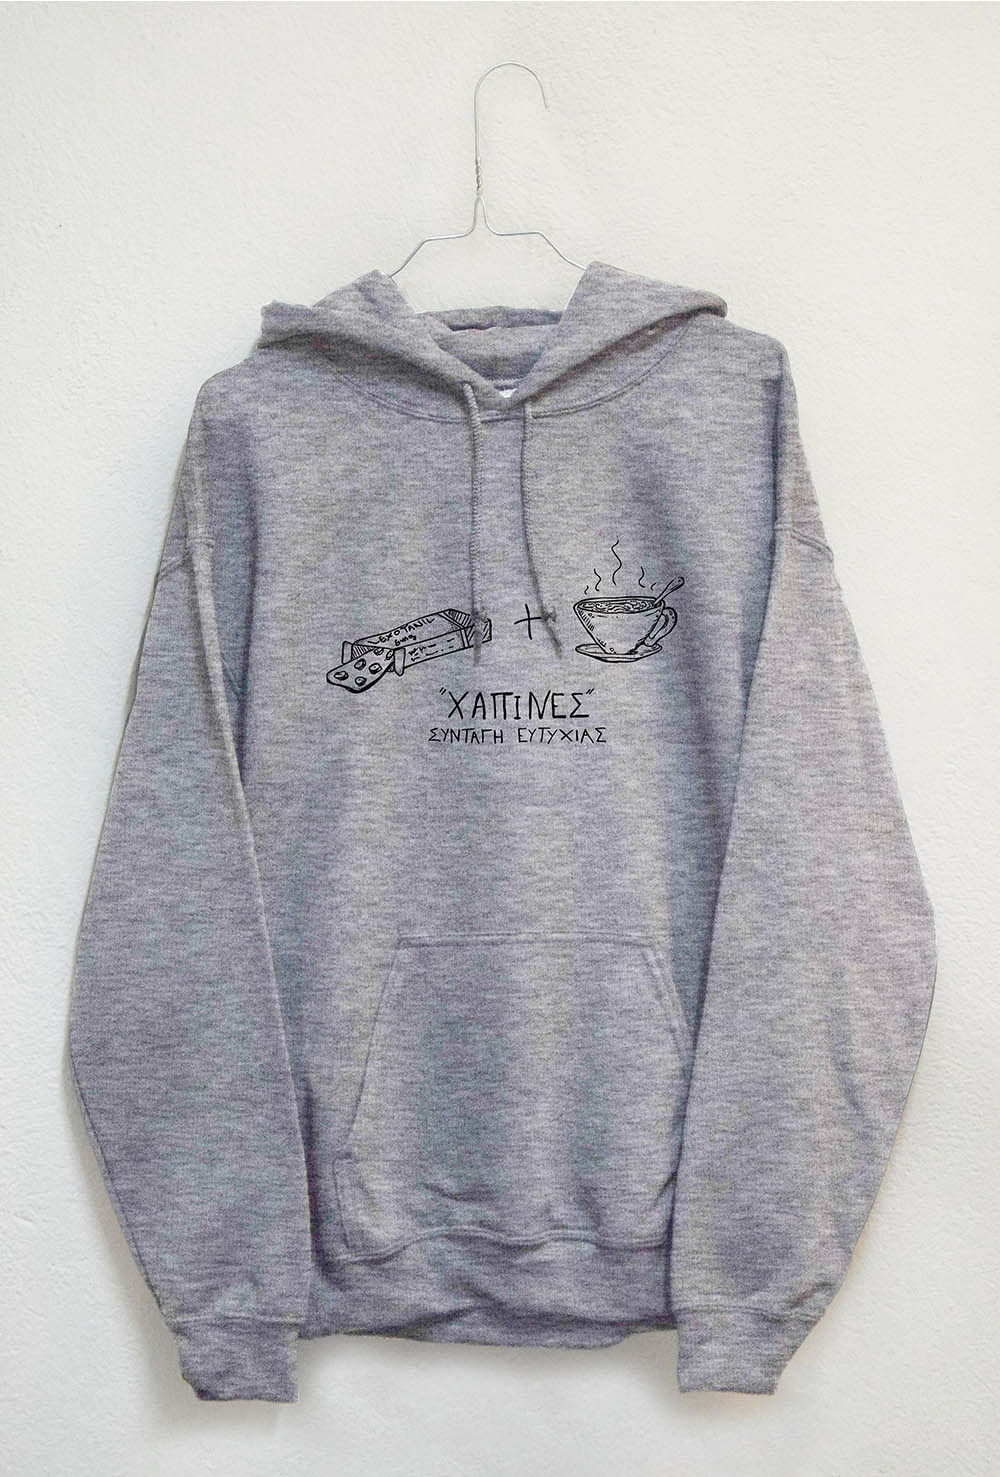 Subworks grey Hoodies recipe for happiness.